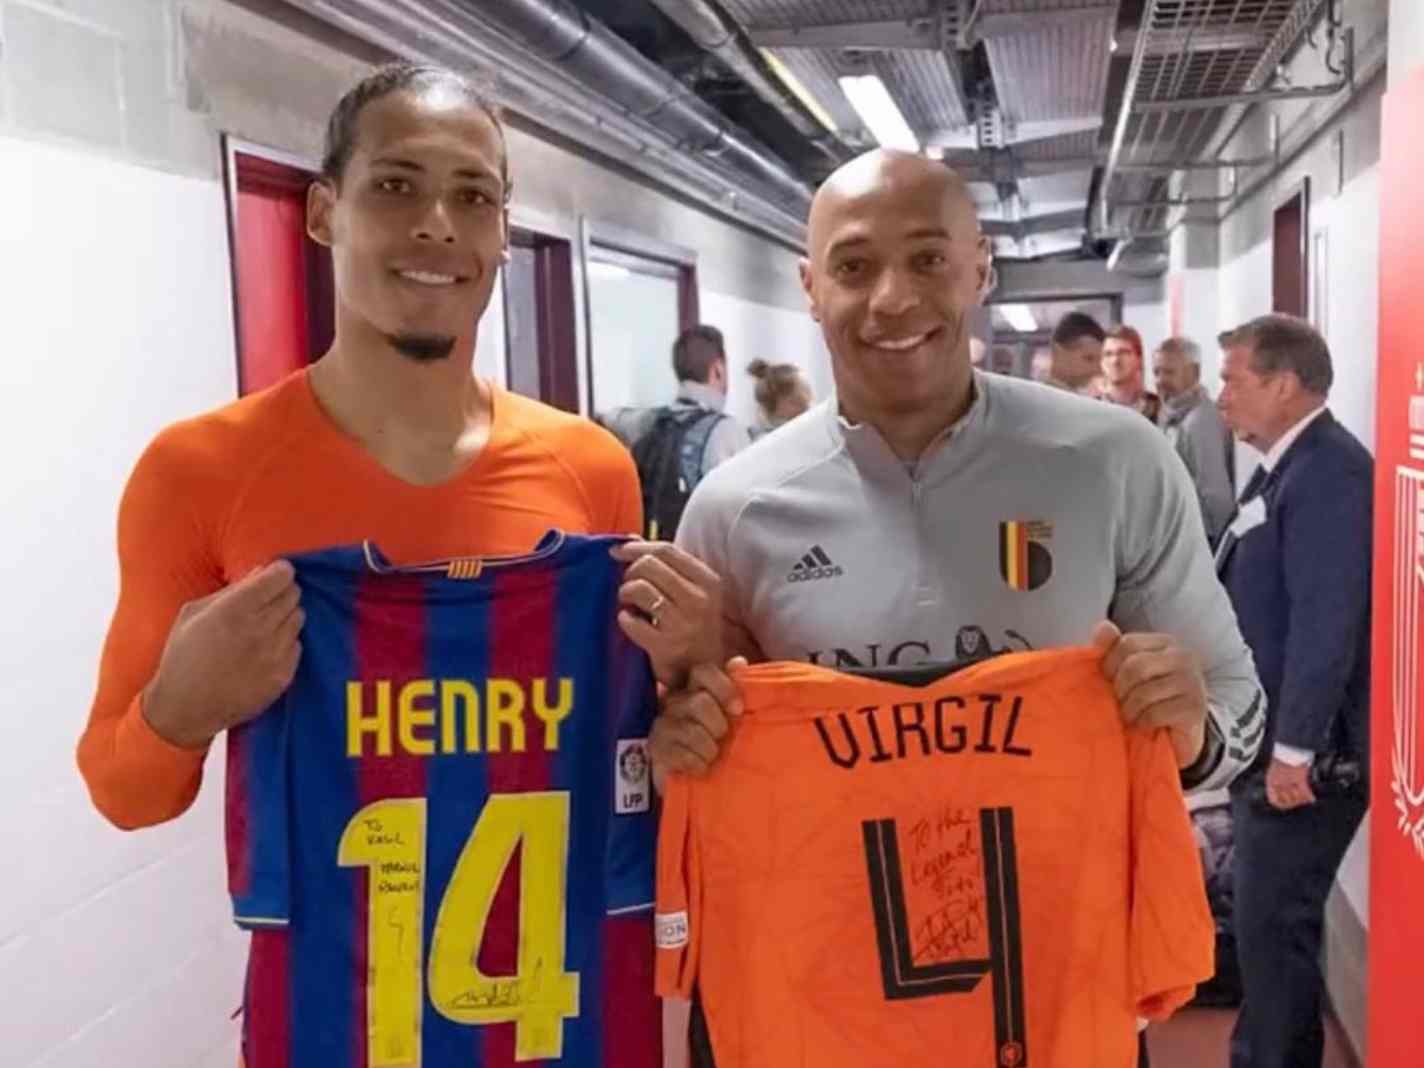 Unmissable: Virgil van Dijk and Thierry Henry exchange their Holland and Barca kits